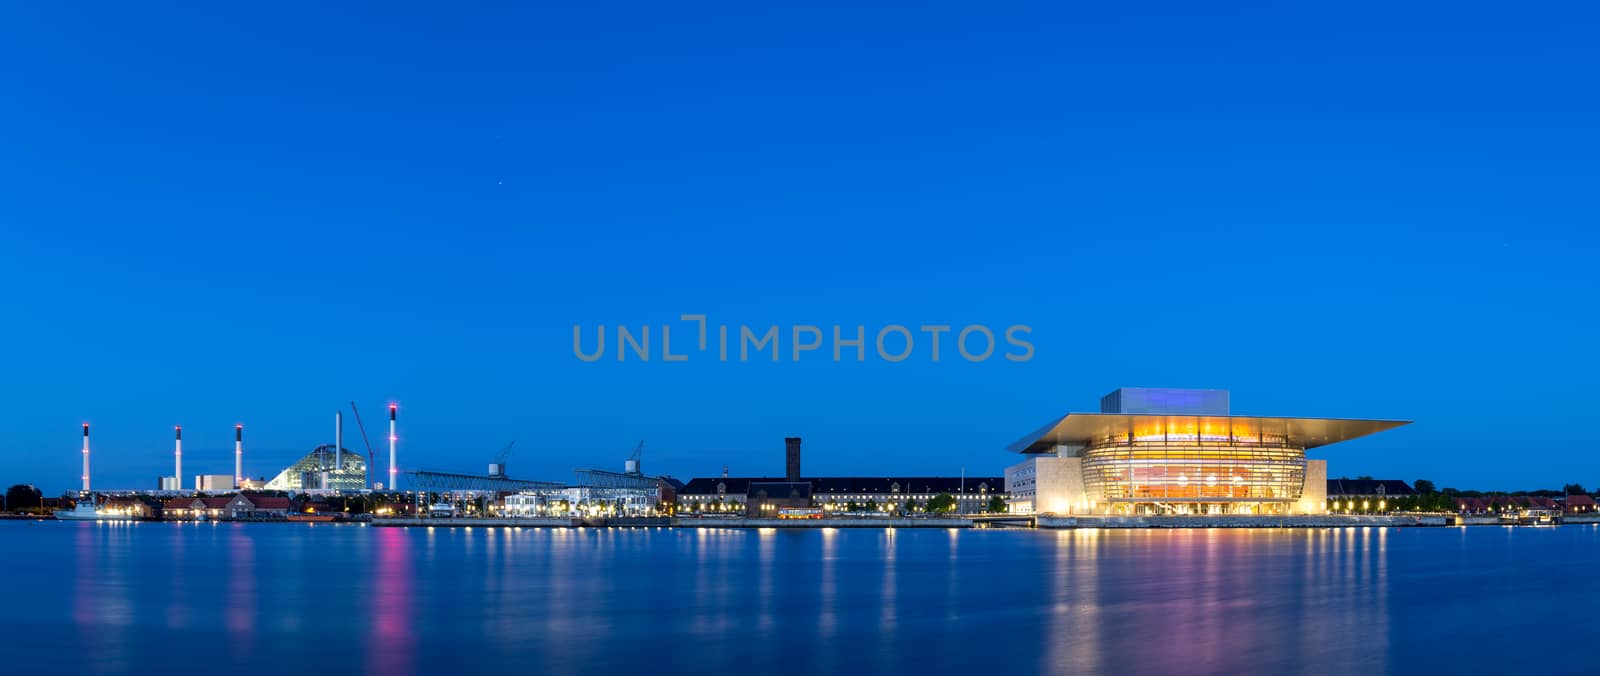 Copenhagen, Denmark - June 05, 2016: Panoramic view over the harbor with the Opera House and Amager power plant